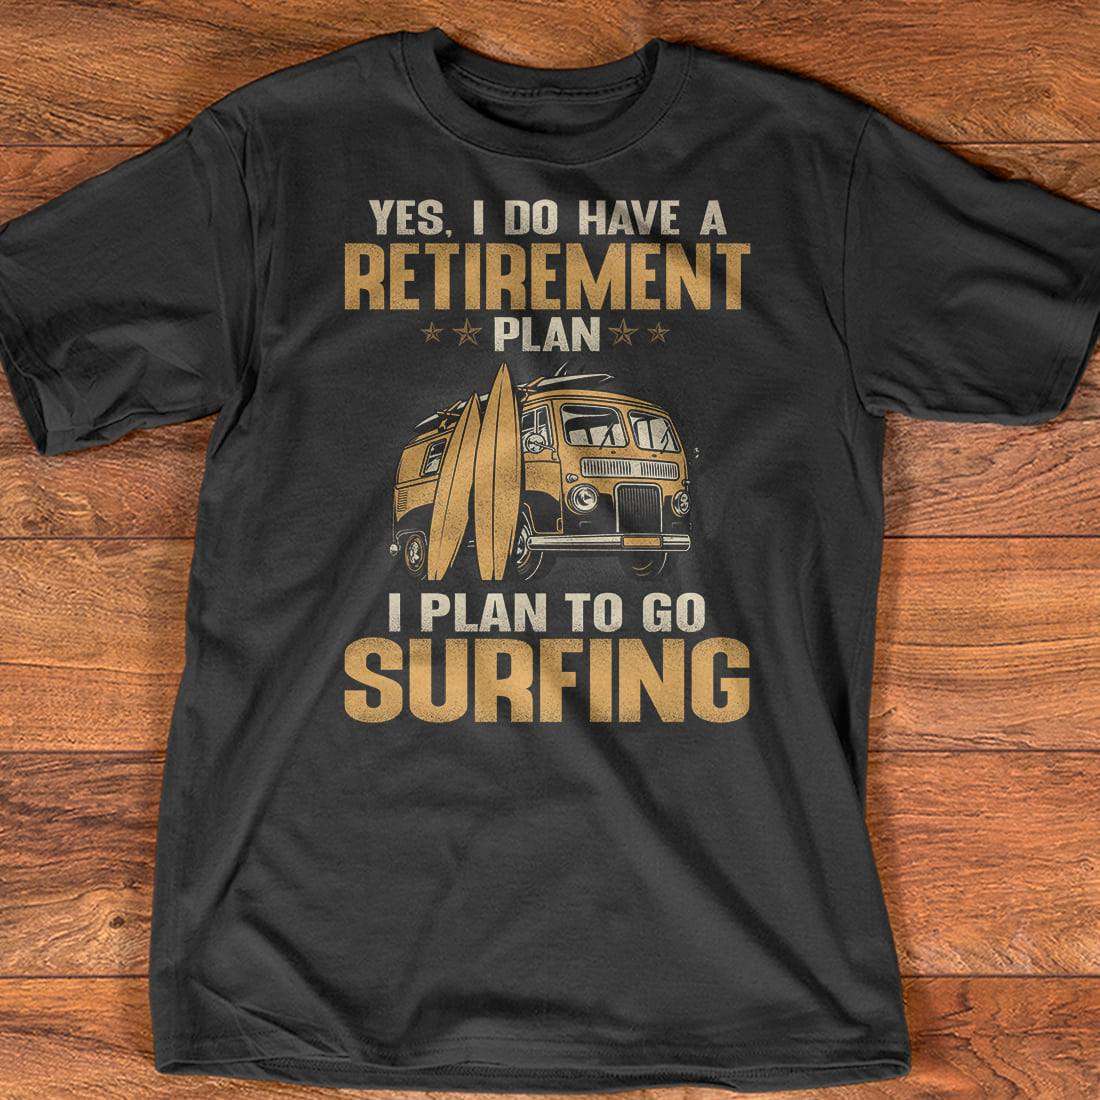 Yes, I do have a retirement plan I plan to go surfing - T-shirt for surfing lover